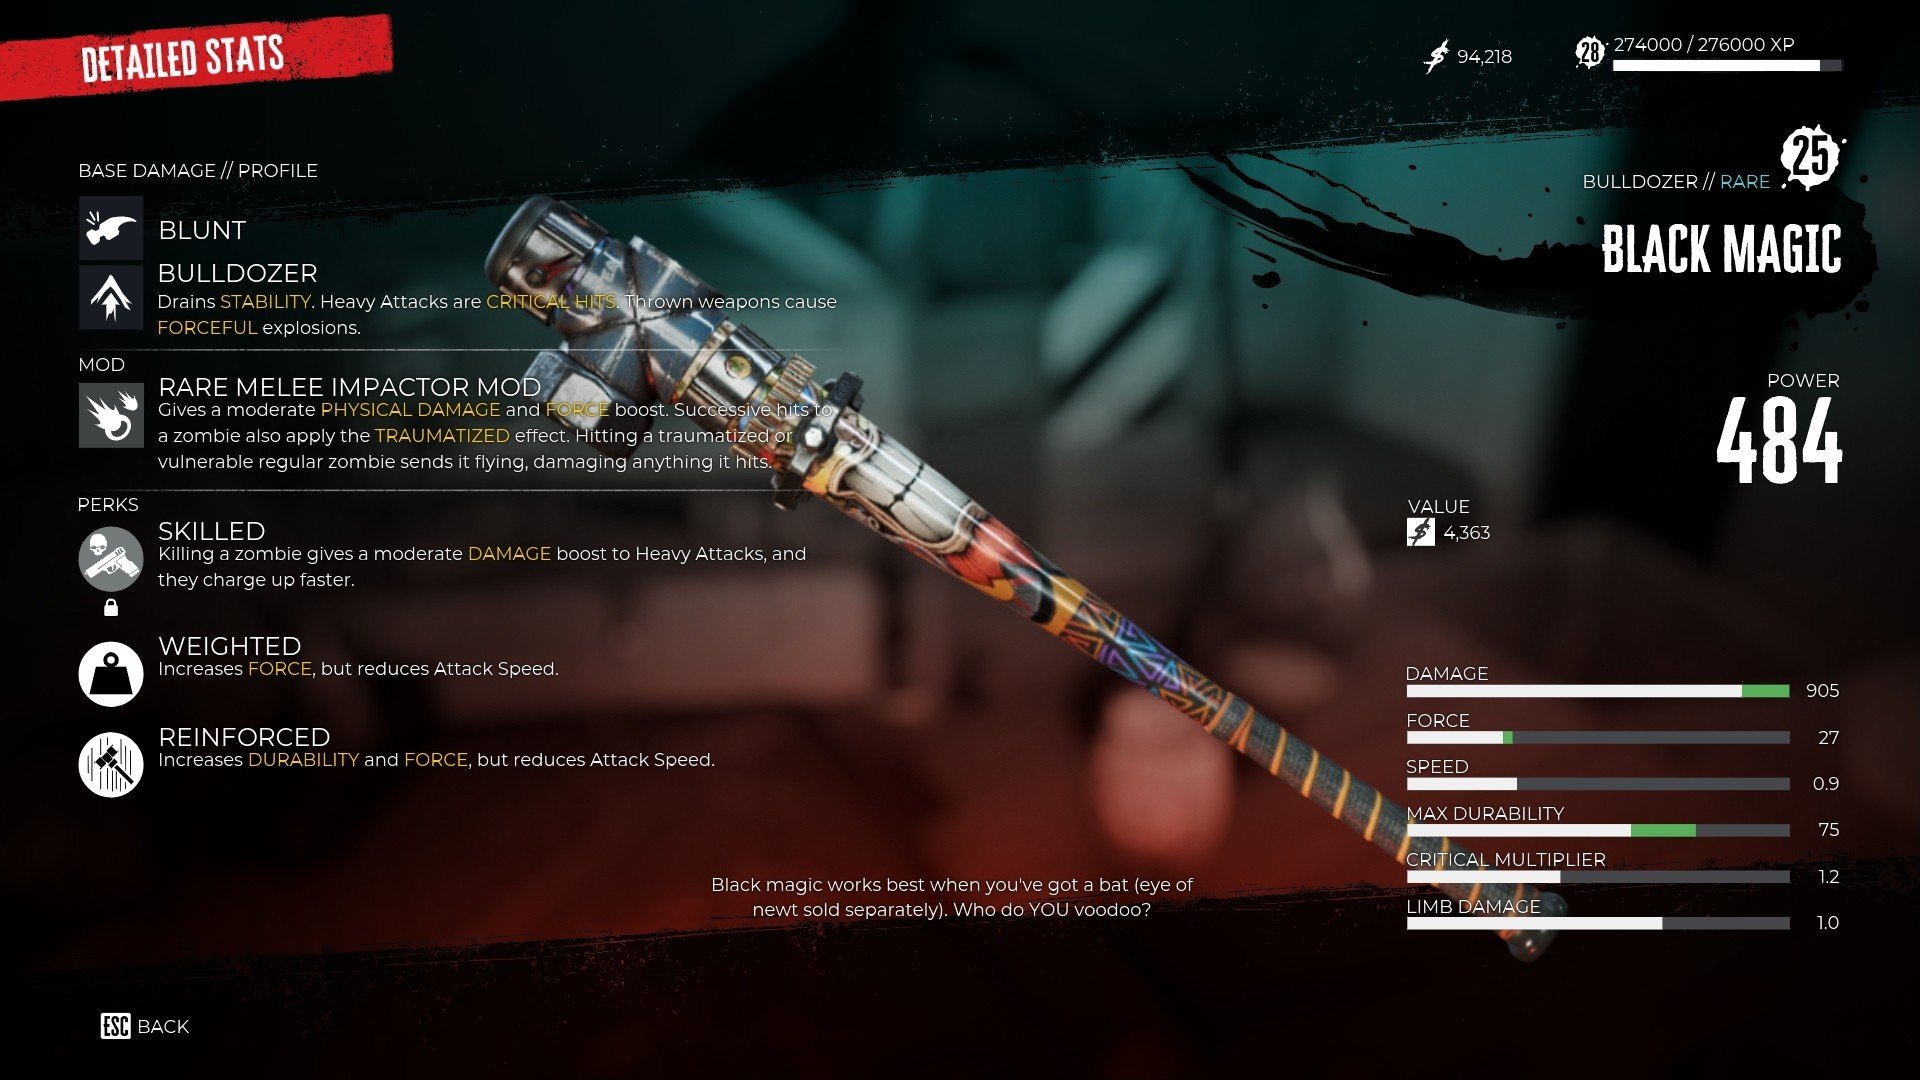 Screenshot of the Dead Island 2 menu showing a baseball bat covered in colorful tattoo-style artwork, as well as crude pipe-based mods.  The bat is surrounded by boxes containing statistical information about the weapon's properties. 